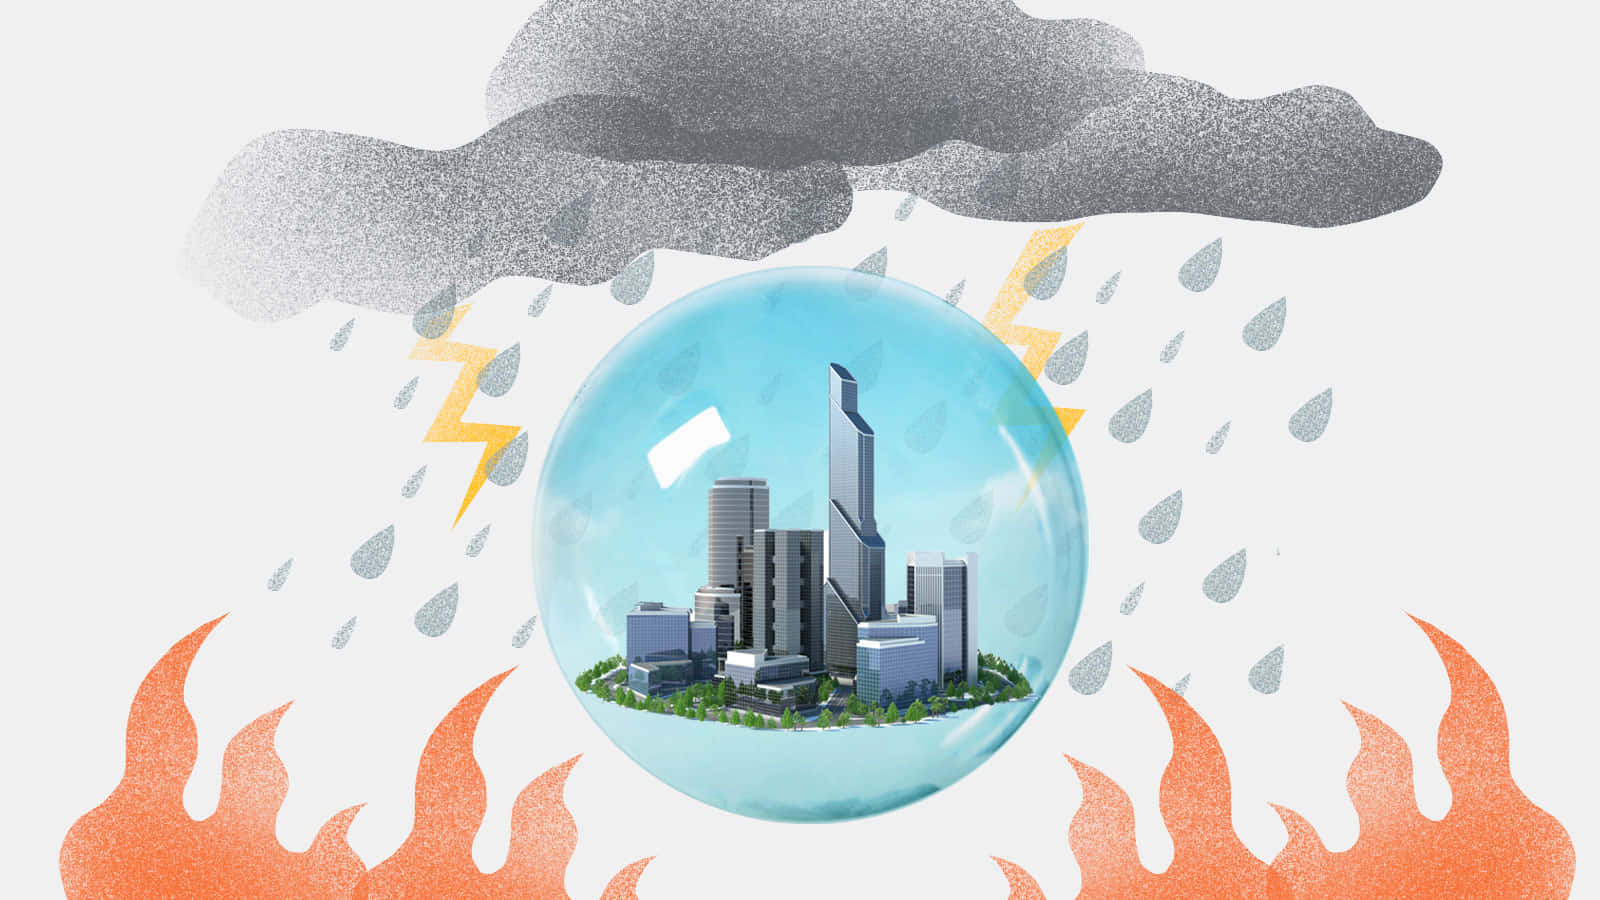 A City In An Ice Ball With Lightning